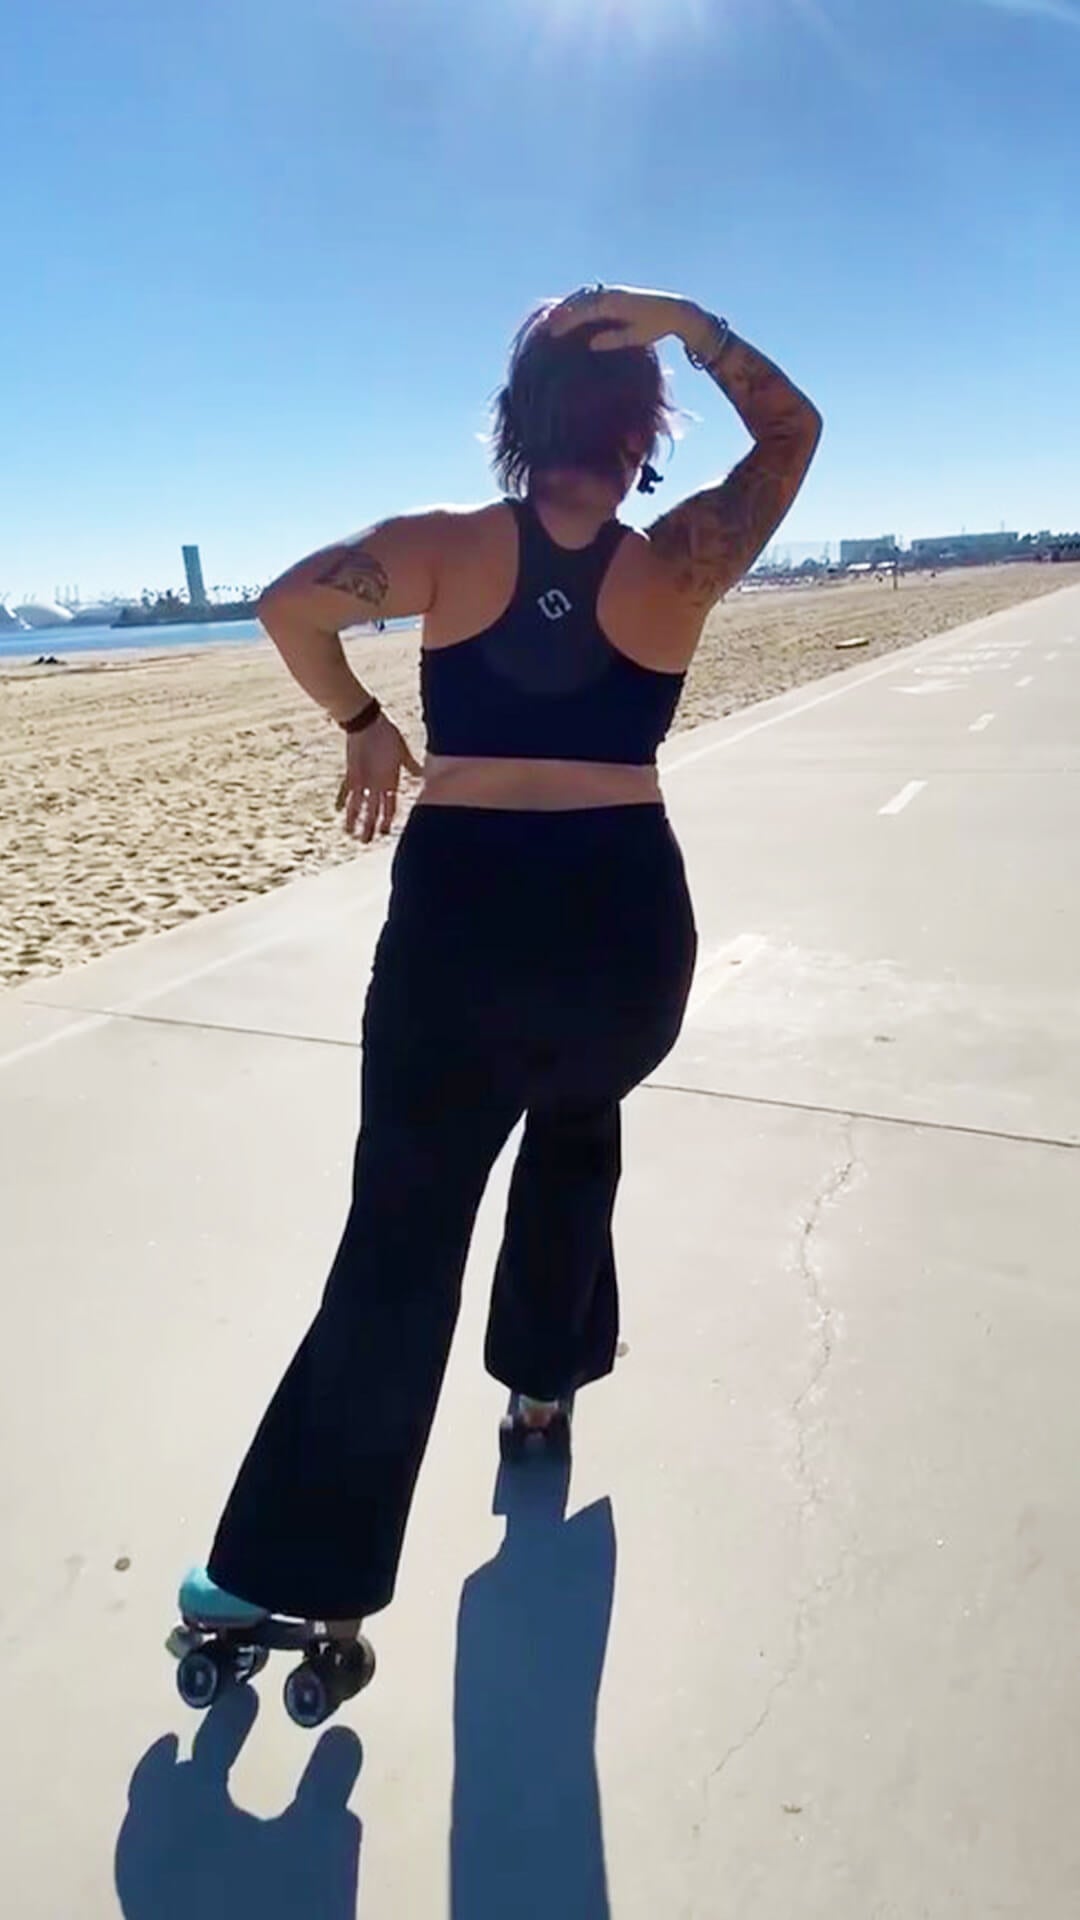 Video with a review for Black Plus Size Pocket Flare Leggings by Superfit Hero.